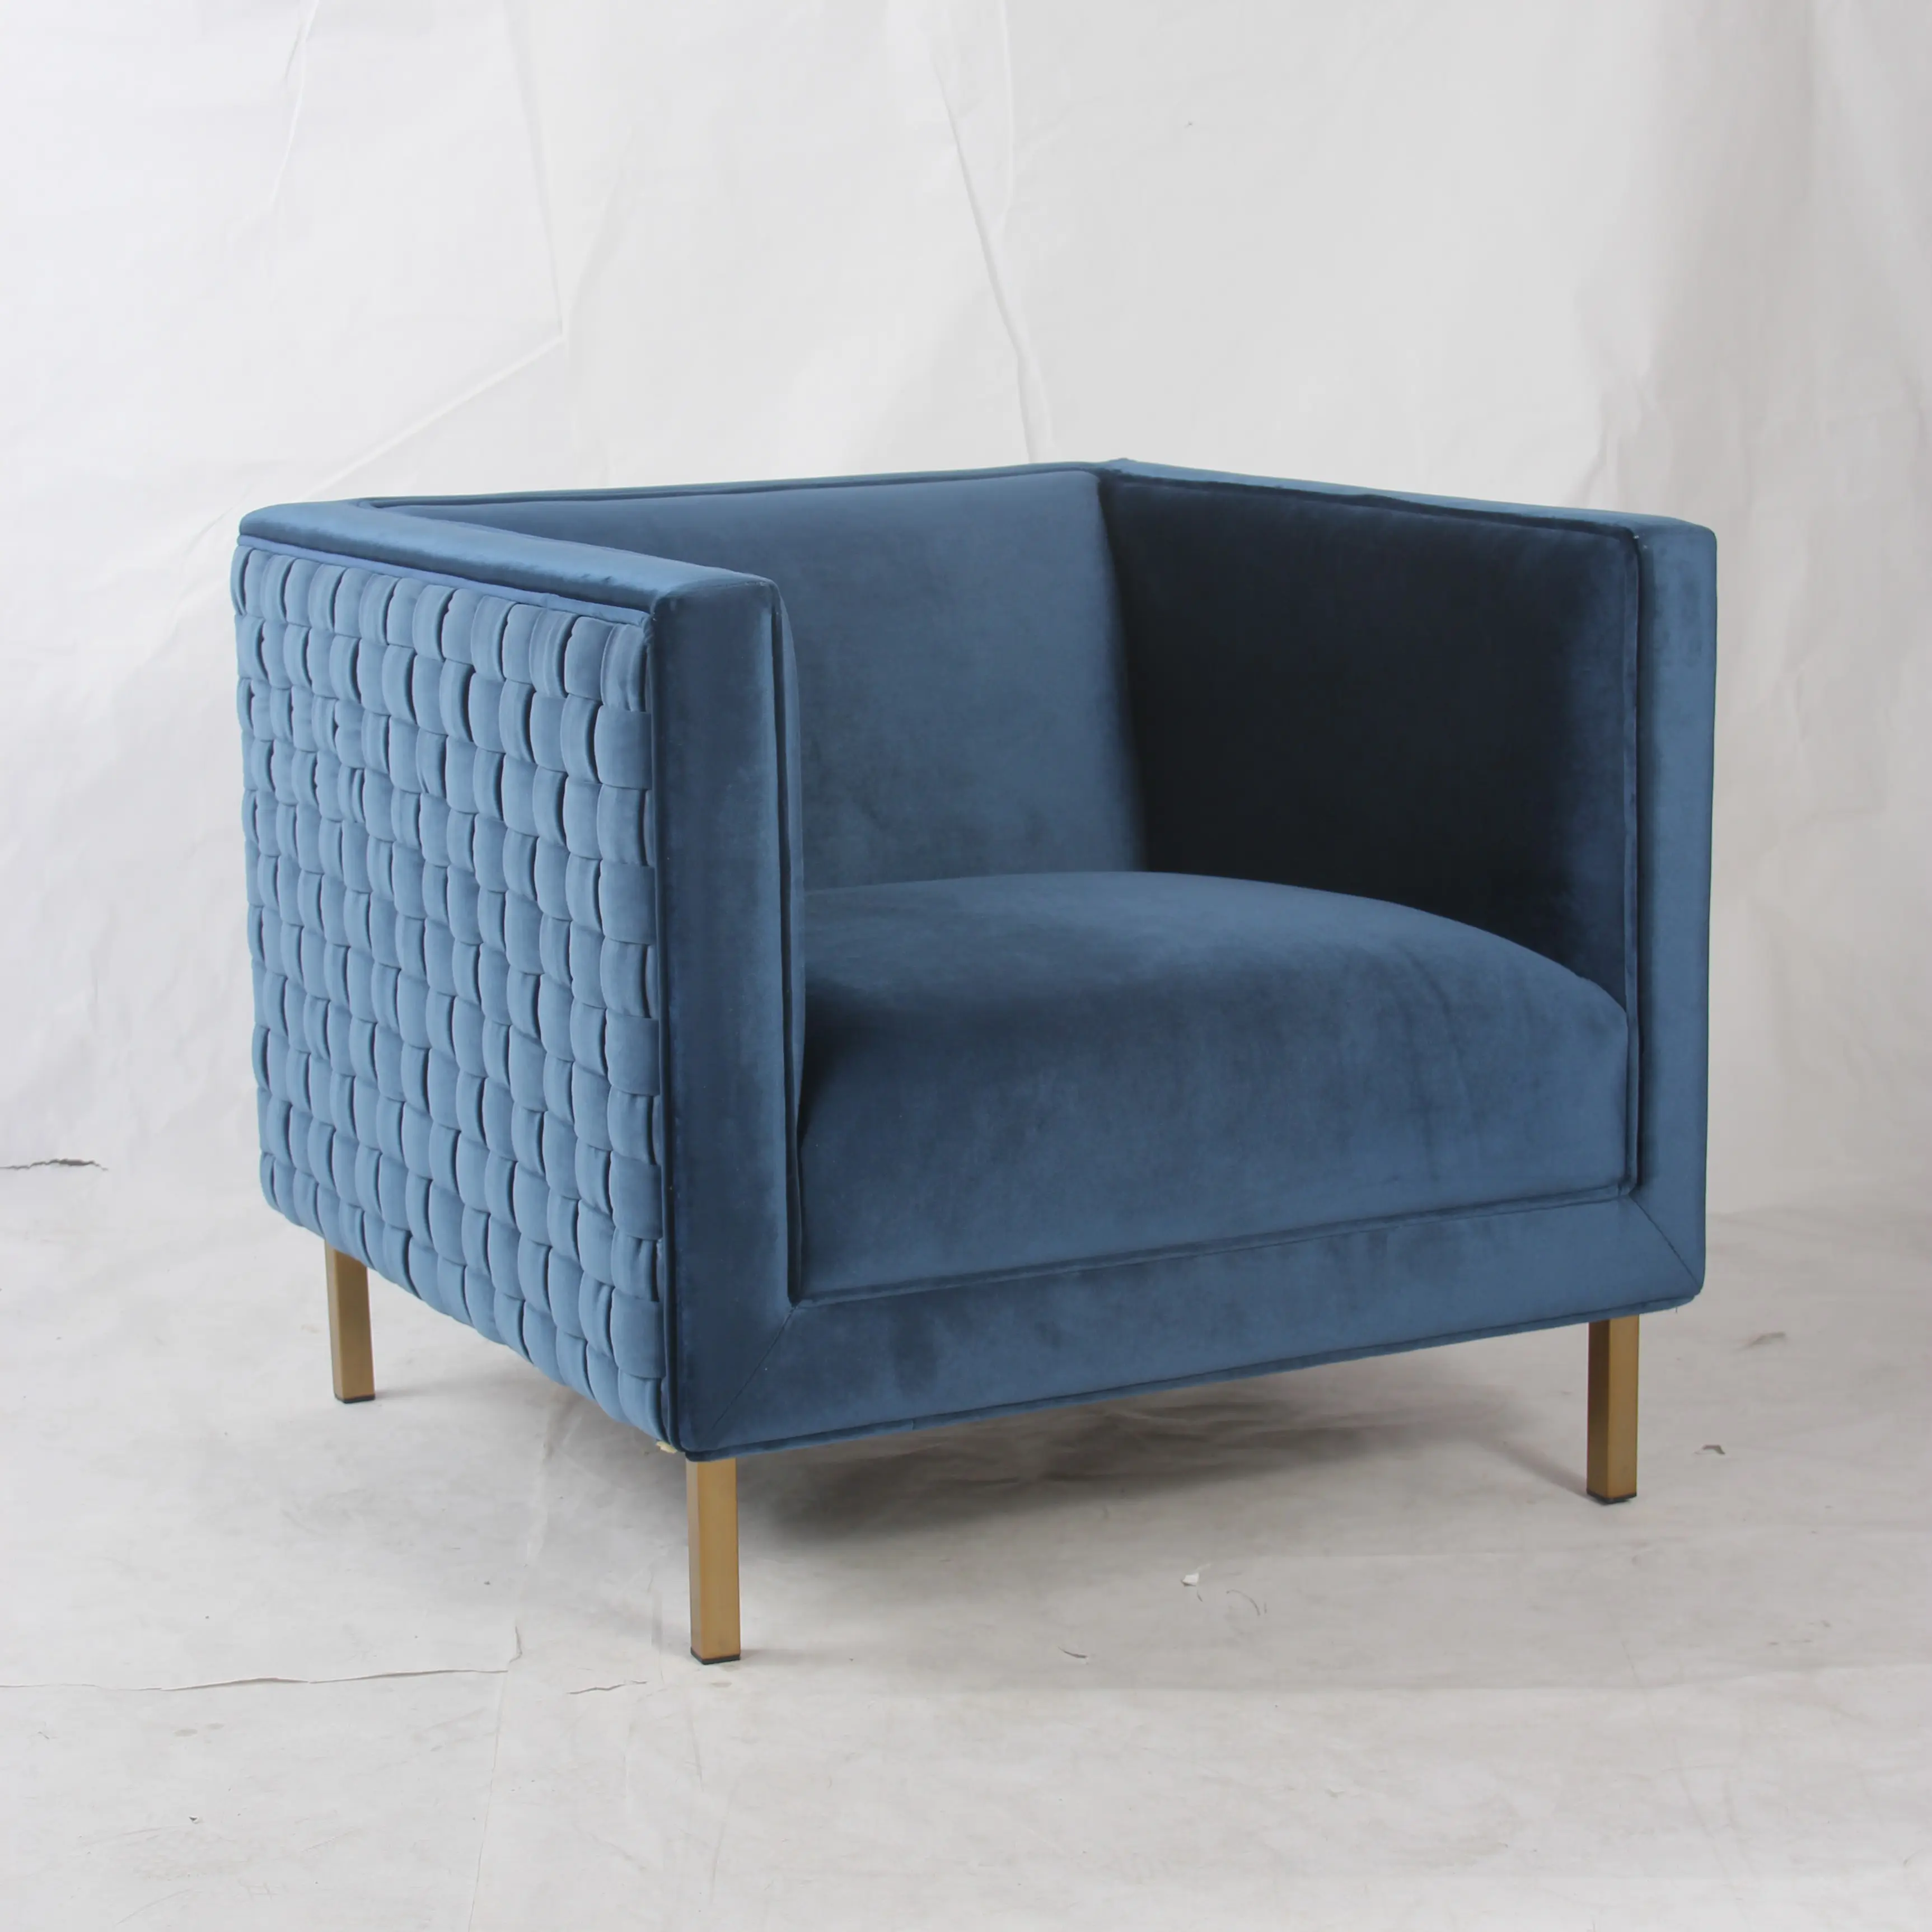 Blue Velvet Club Sofa Chair、Single Leisure Chair、Hotel Guest Accent ChairためLiving Room、Restaurant、Cafe